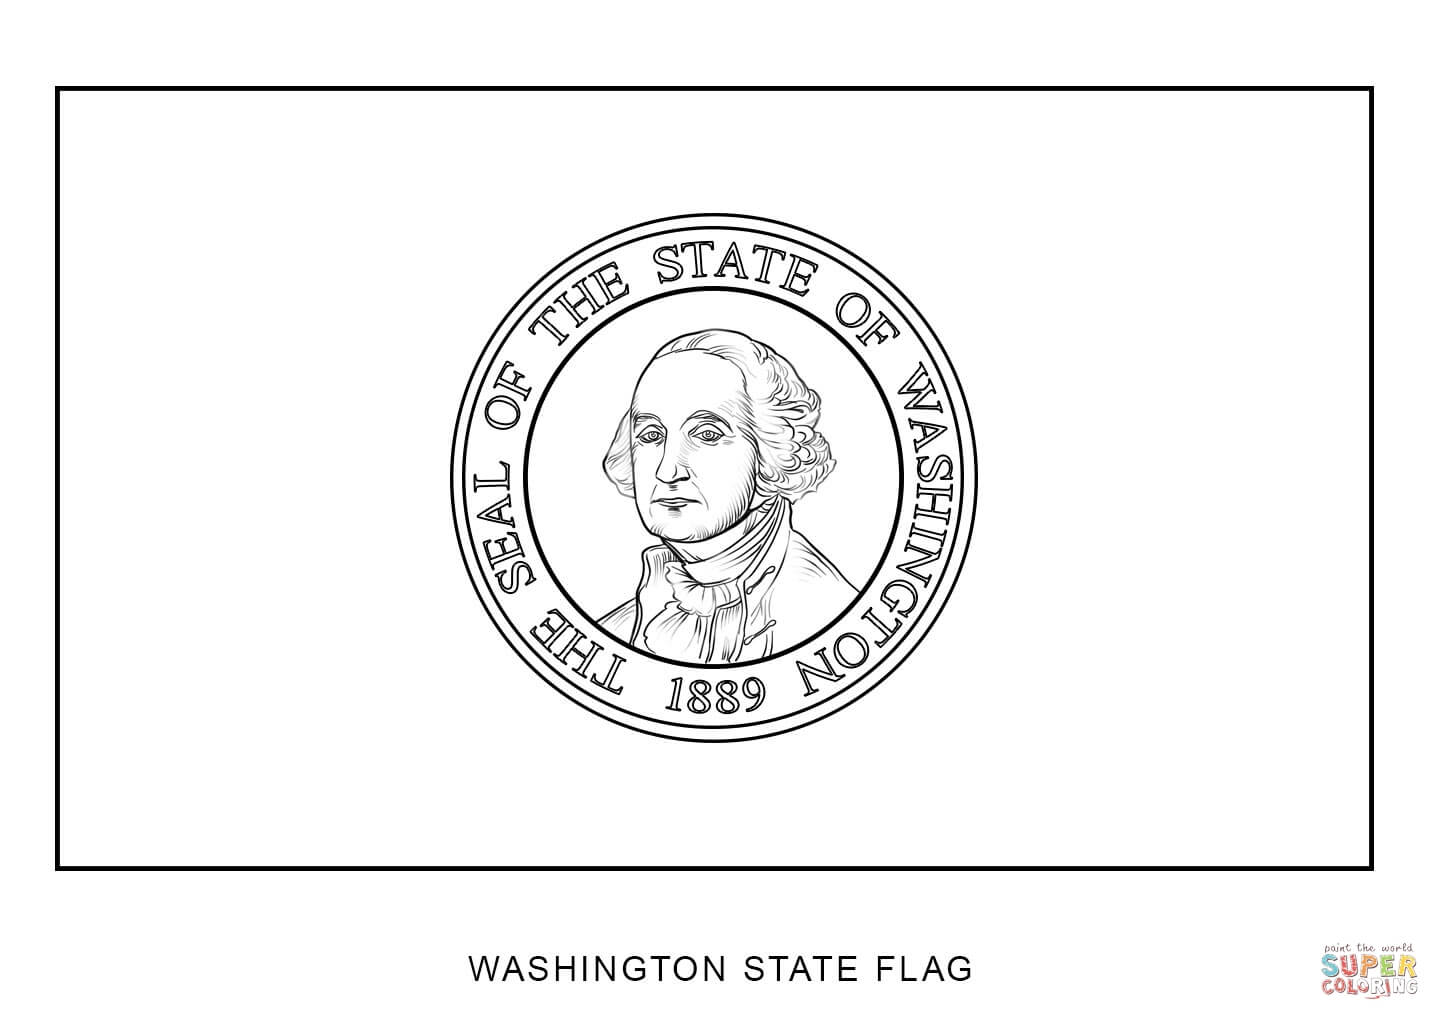 Washington State Flag coloring page | Free Printable Coloring Pages